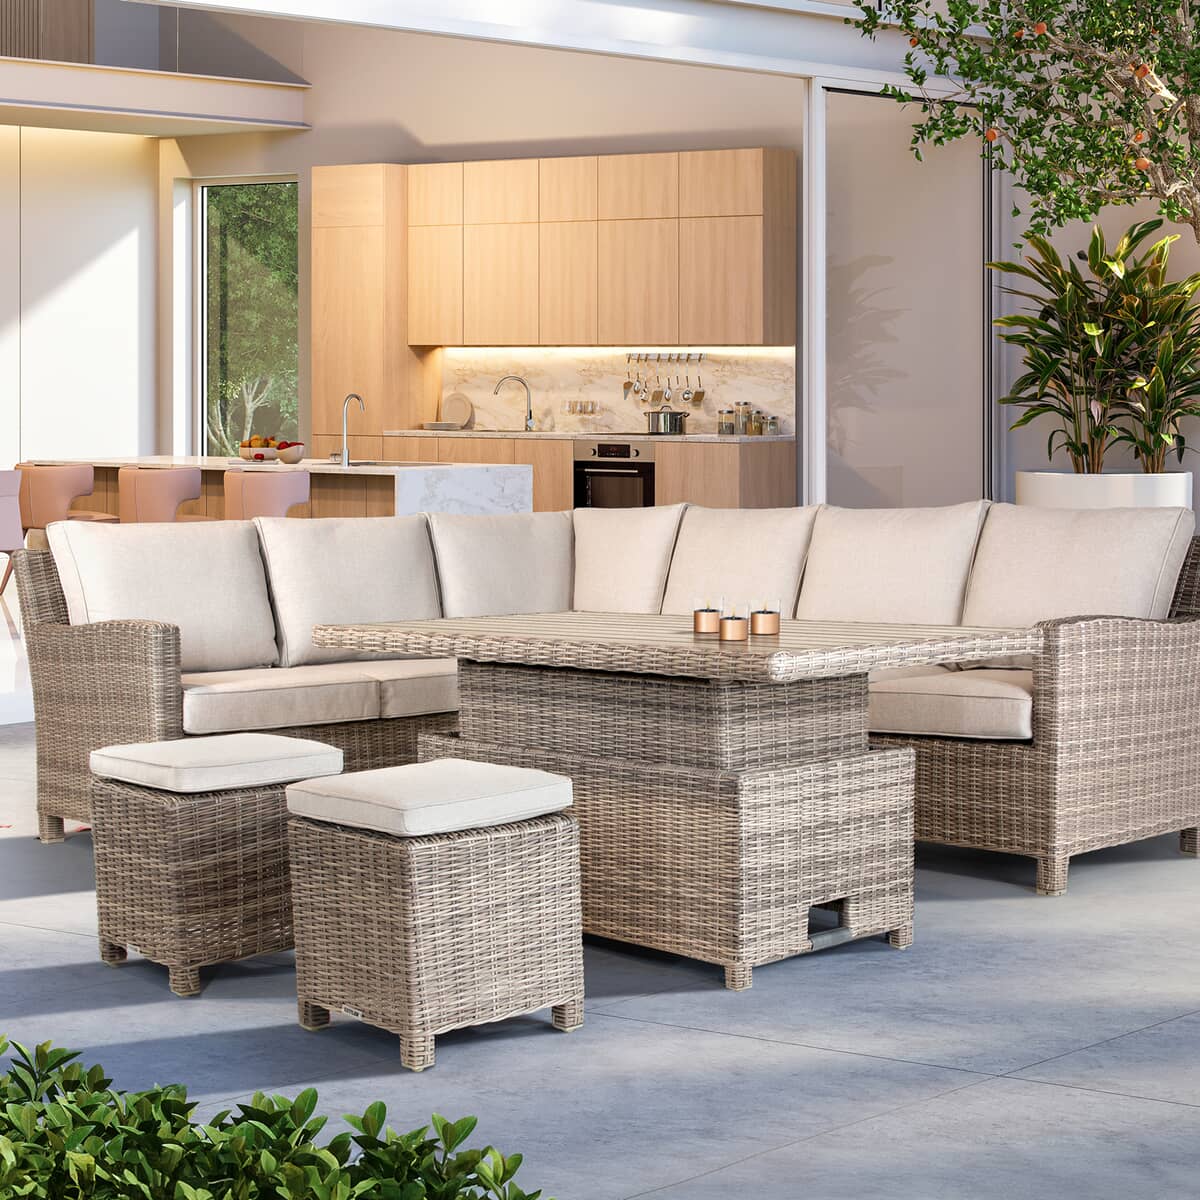 Kettler Signature Palma Corner Sofa RH Casual Dining Set with High/Low Glass Top Table Oyster